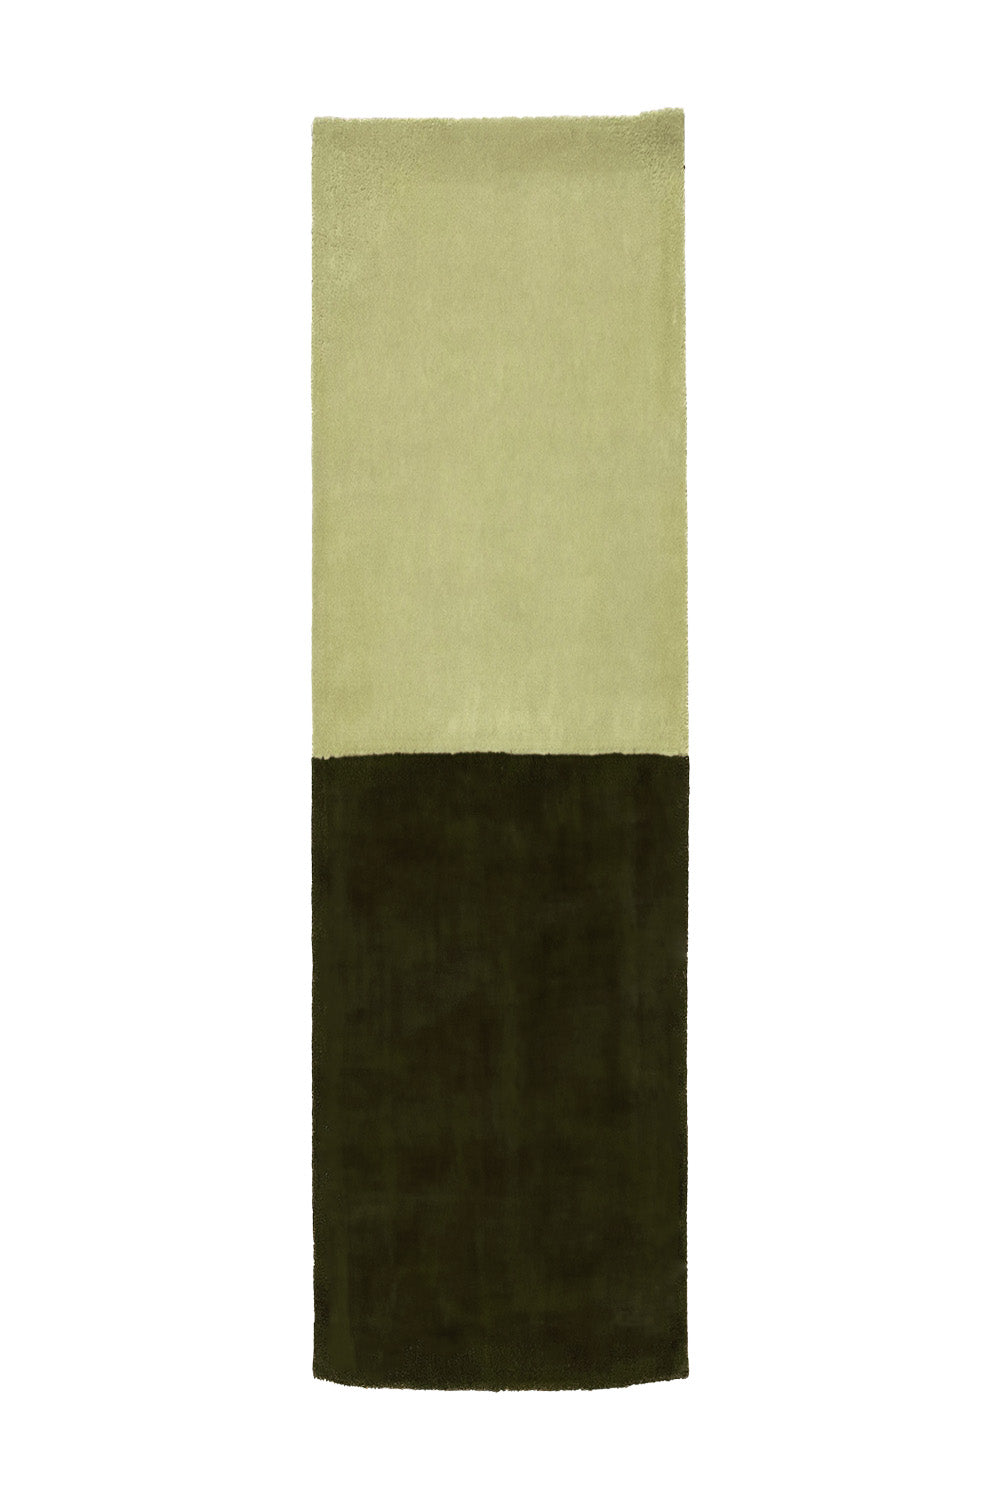 Classic Color Block Hand Tufted Wool Runner Rug in olive